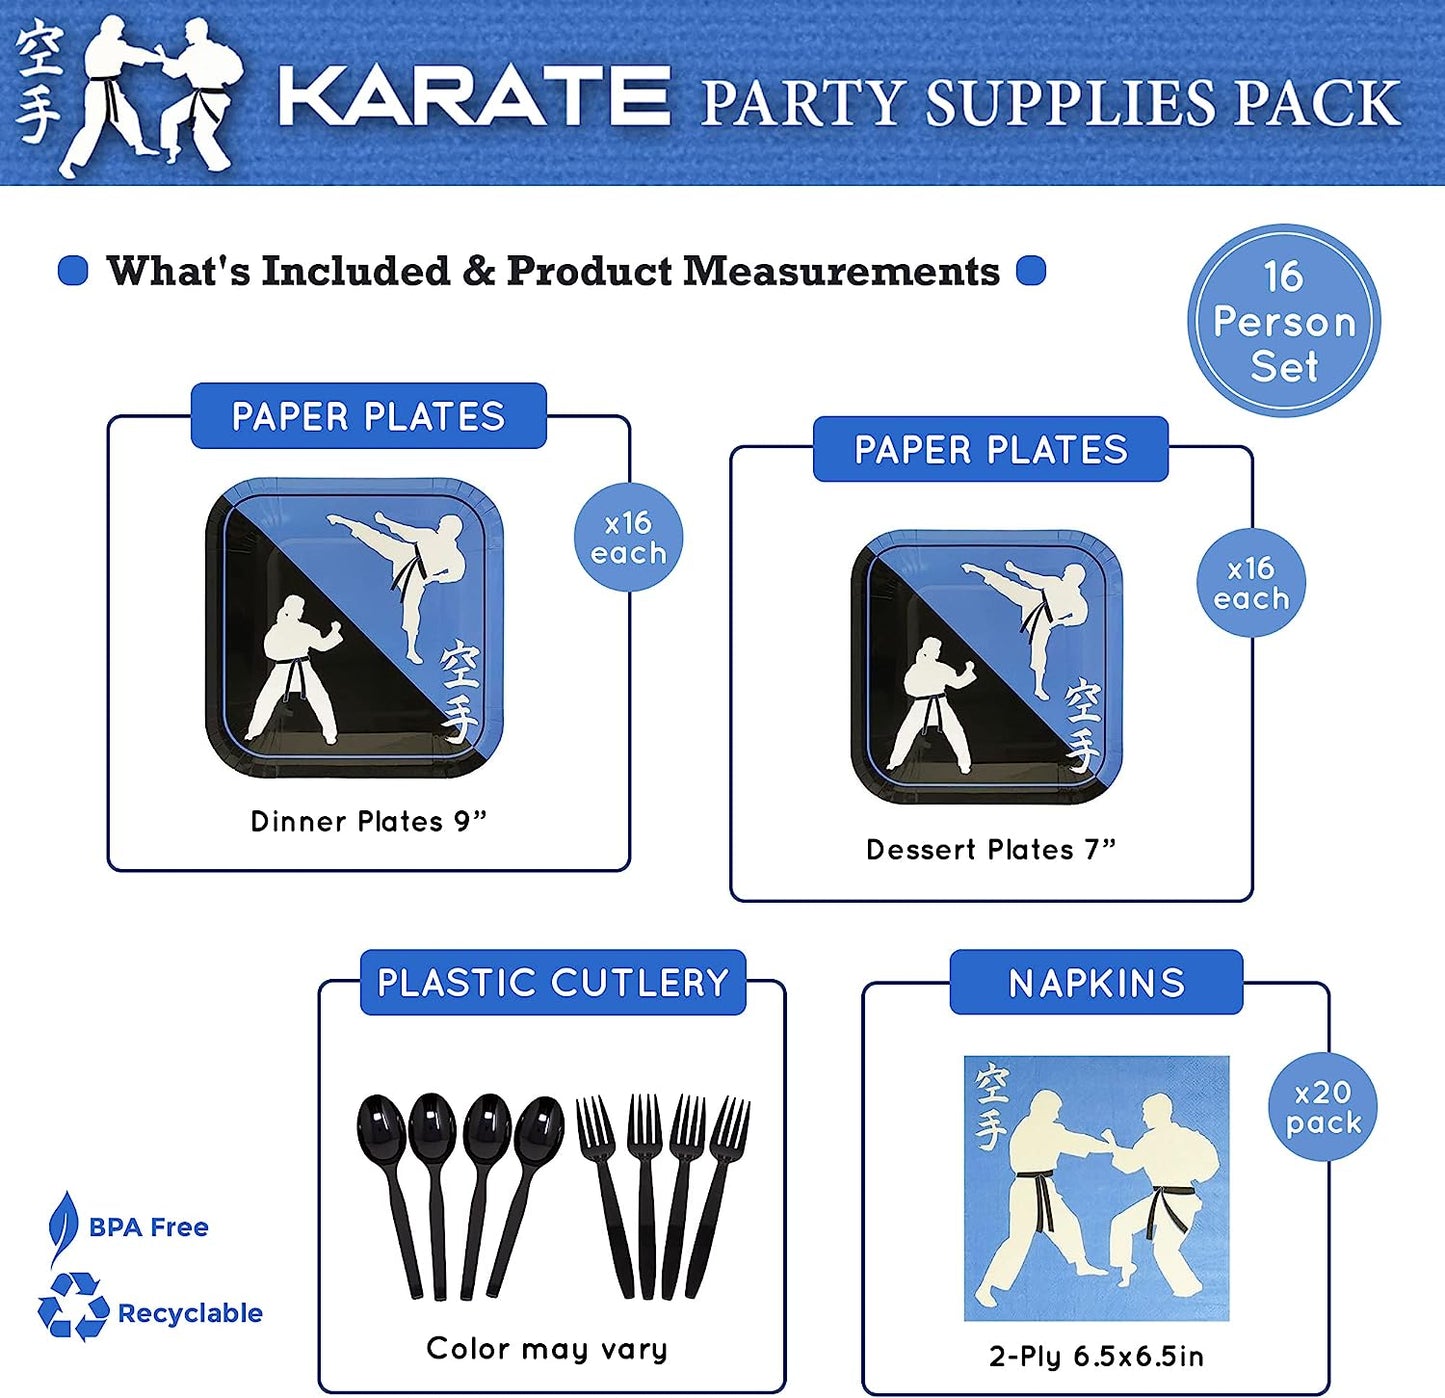 Karate Party Pack includes 16 9-inch paper dinner plates, 16 7-inch paper dessert plates, 20 paper lunch napkins, plastic forks, and plastic spoons.